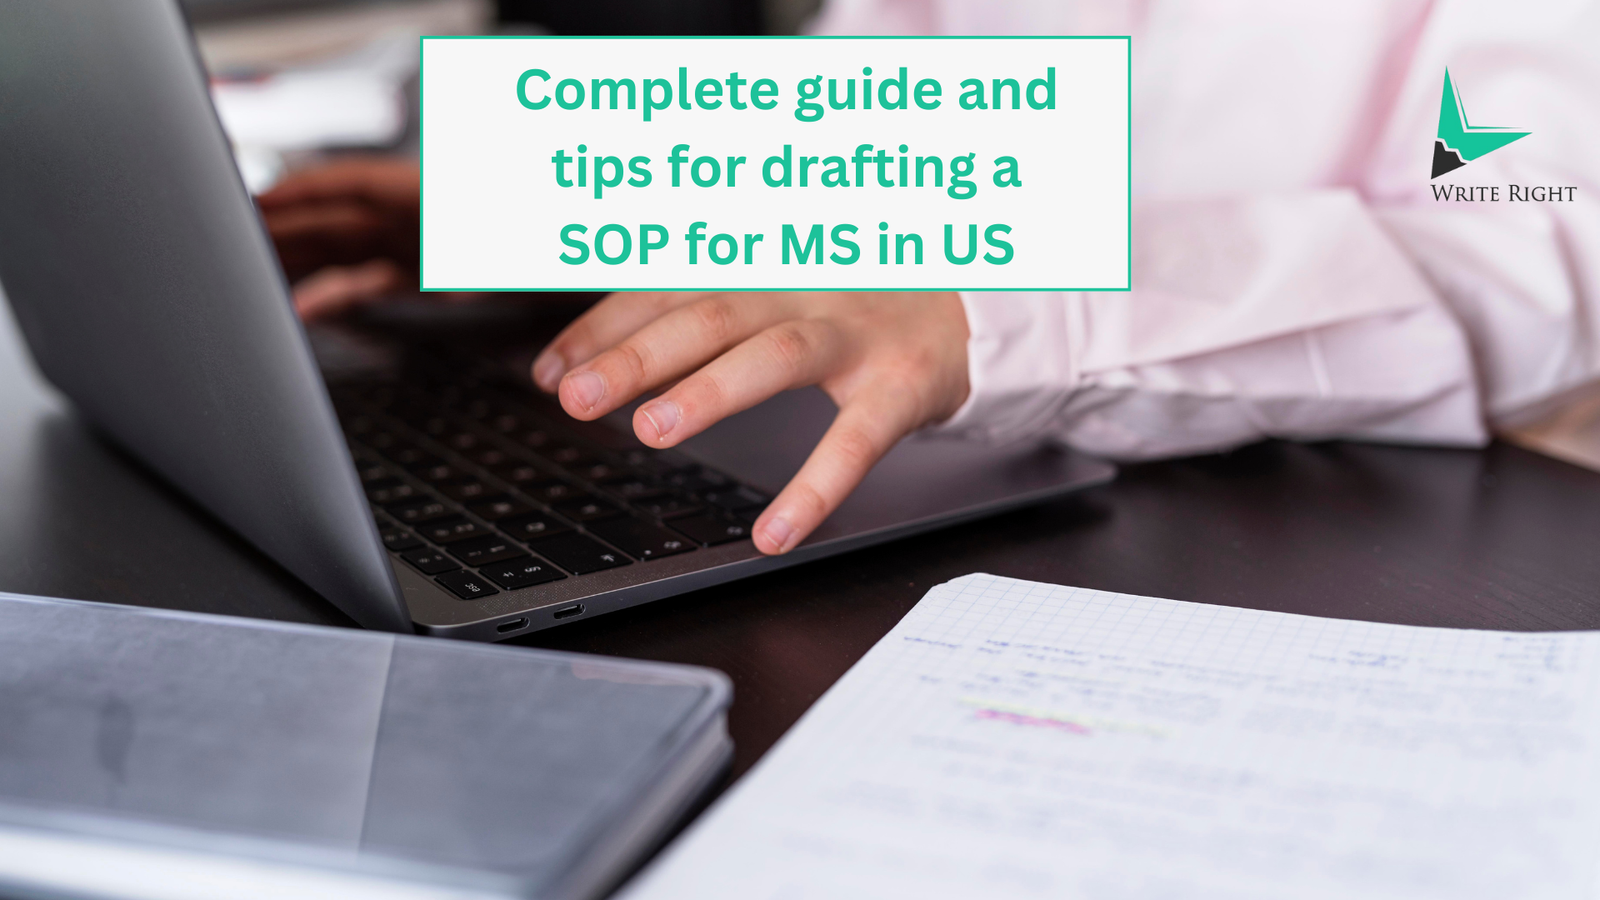 Complete guide and tips for drafting an SOP for MS in US